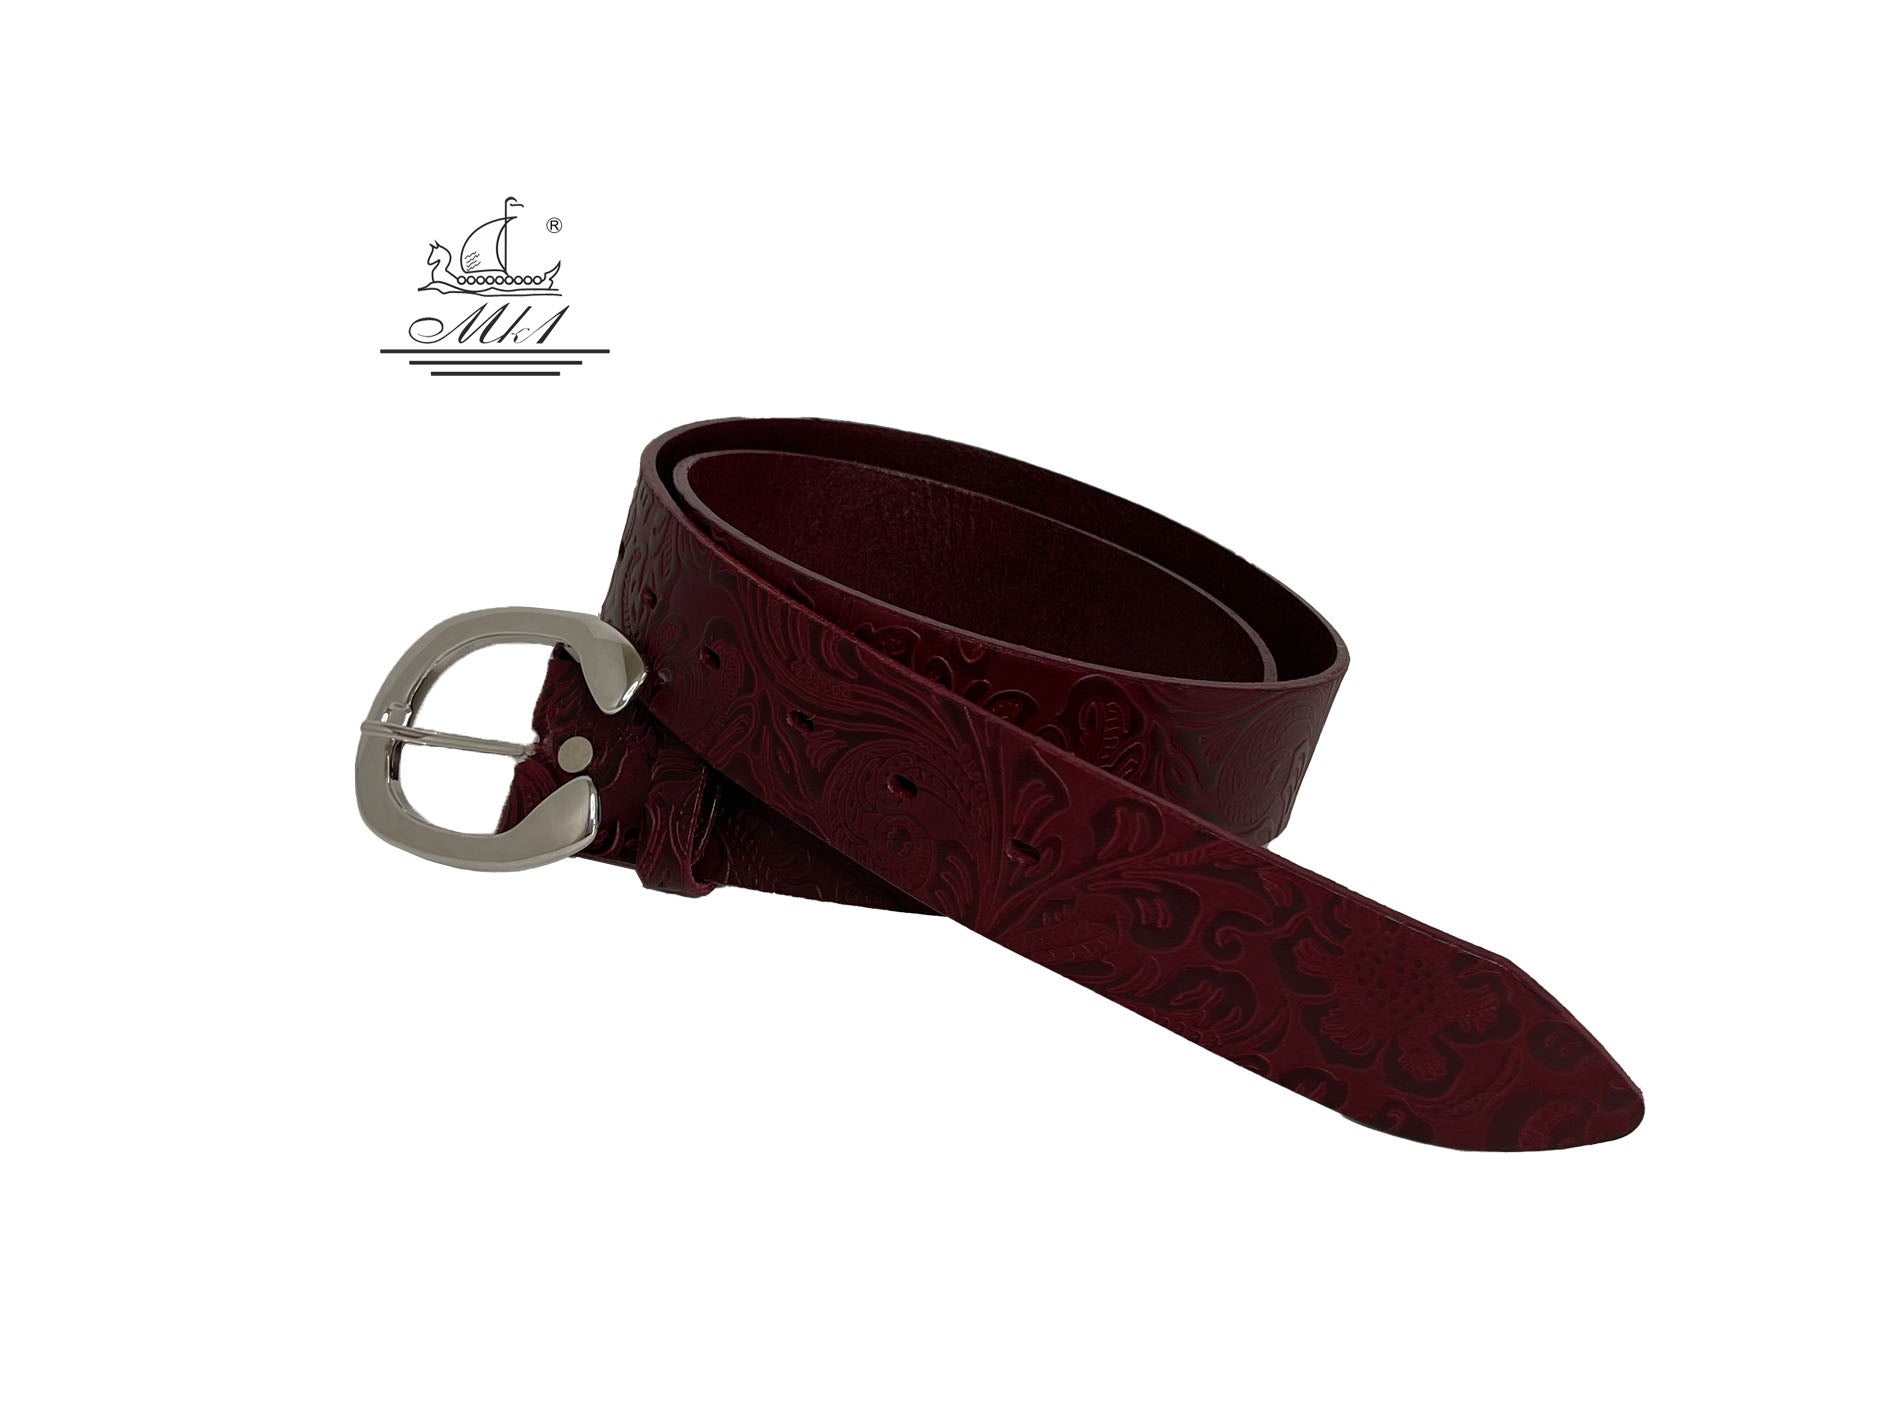 Unisex 4cm wide belt handcrafted from burgundy leather with flower design. 101294/40BG/LD